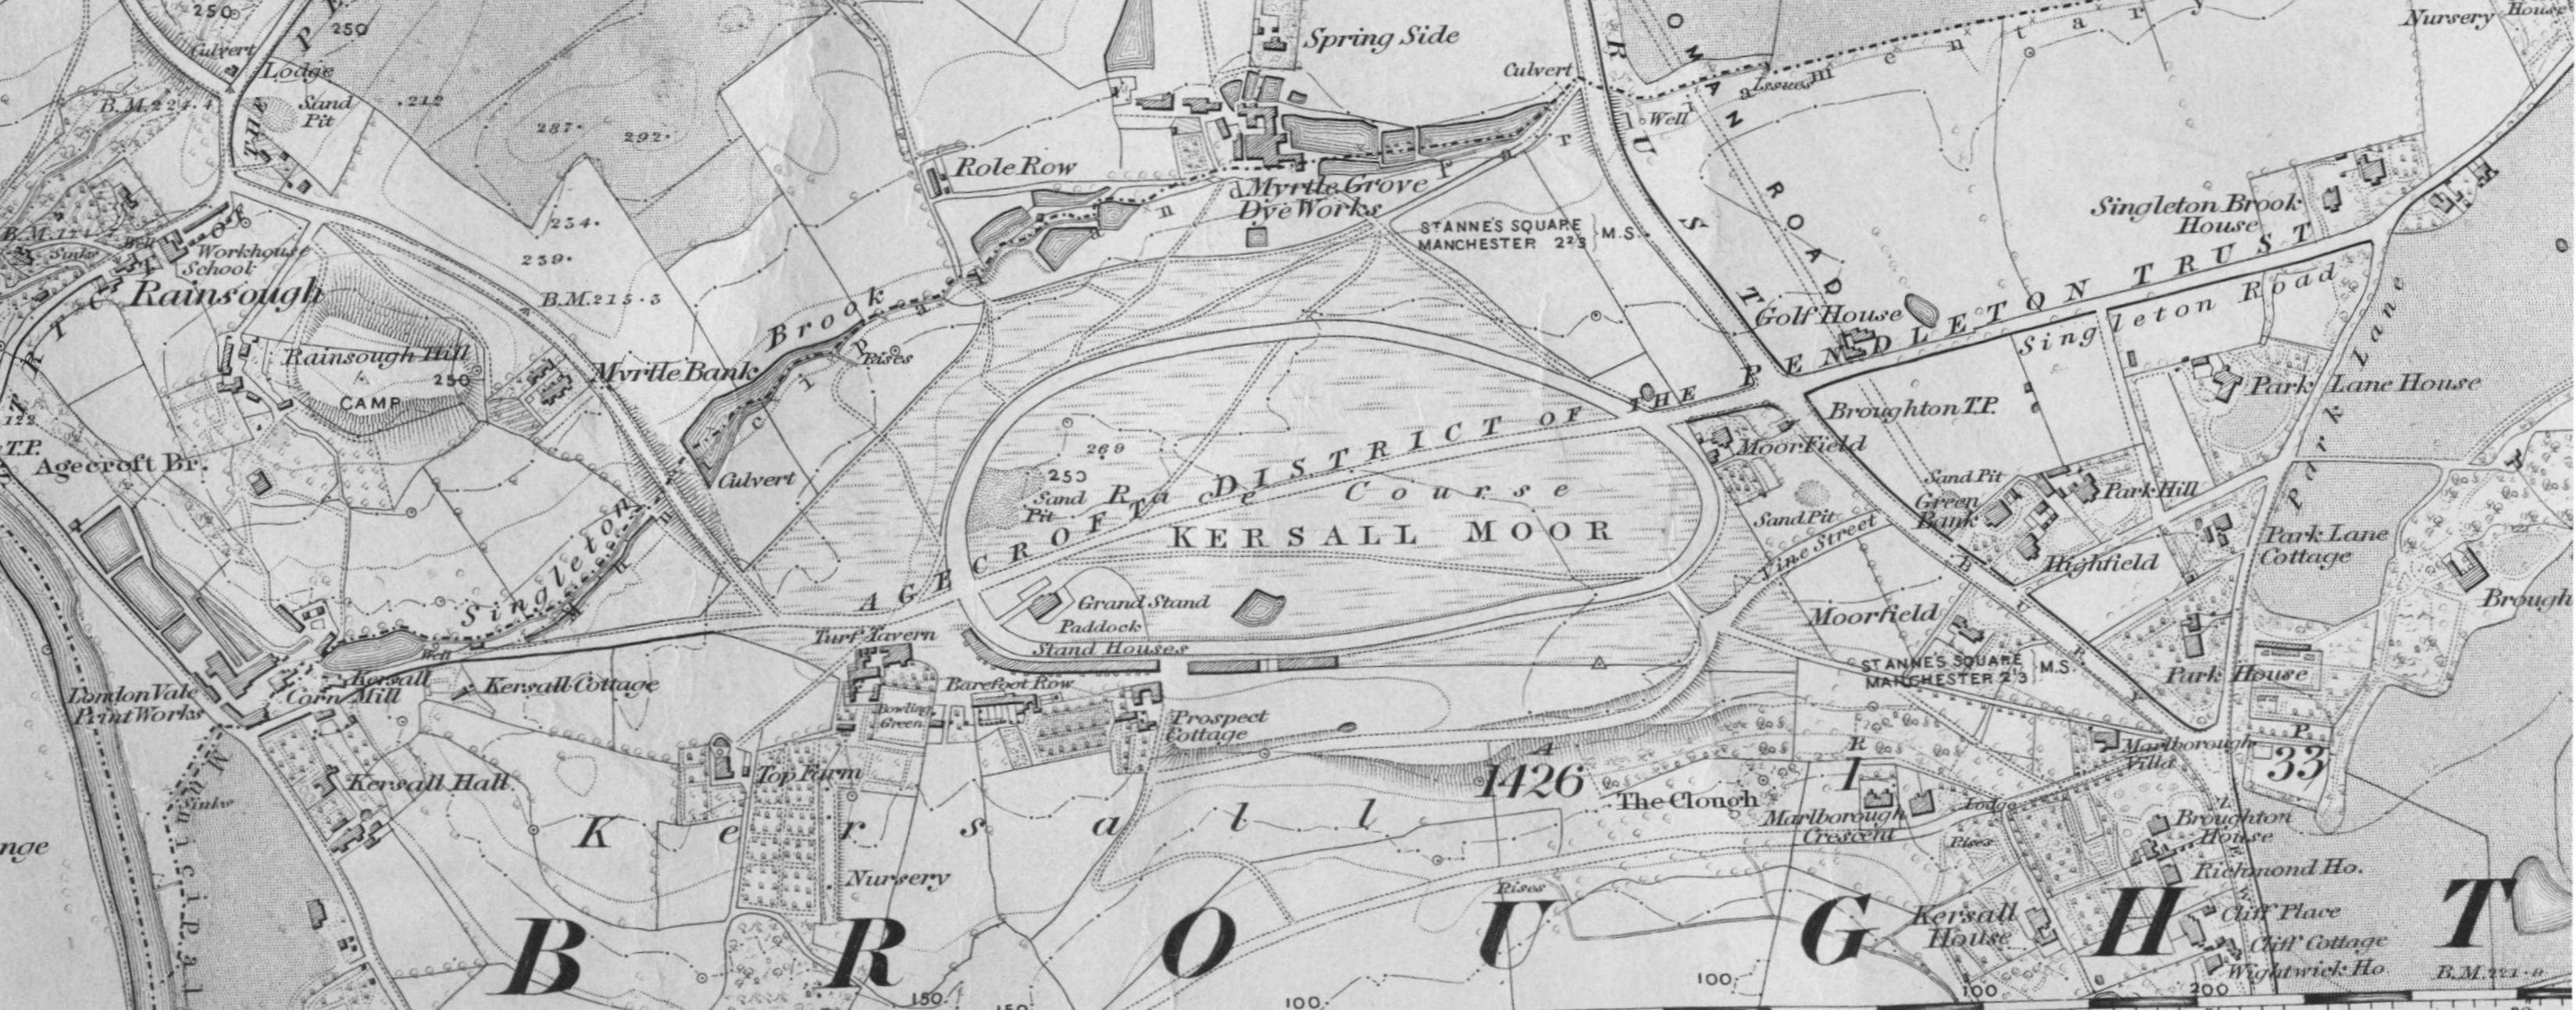 OLD ORDNANCE SURVEY MAP HEATON PARK 1907 MANCHESTER ROODEN LANE BURY OLD ROAD 